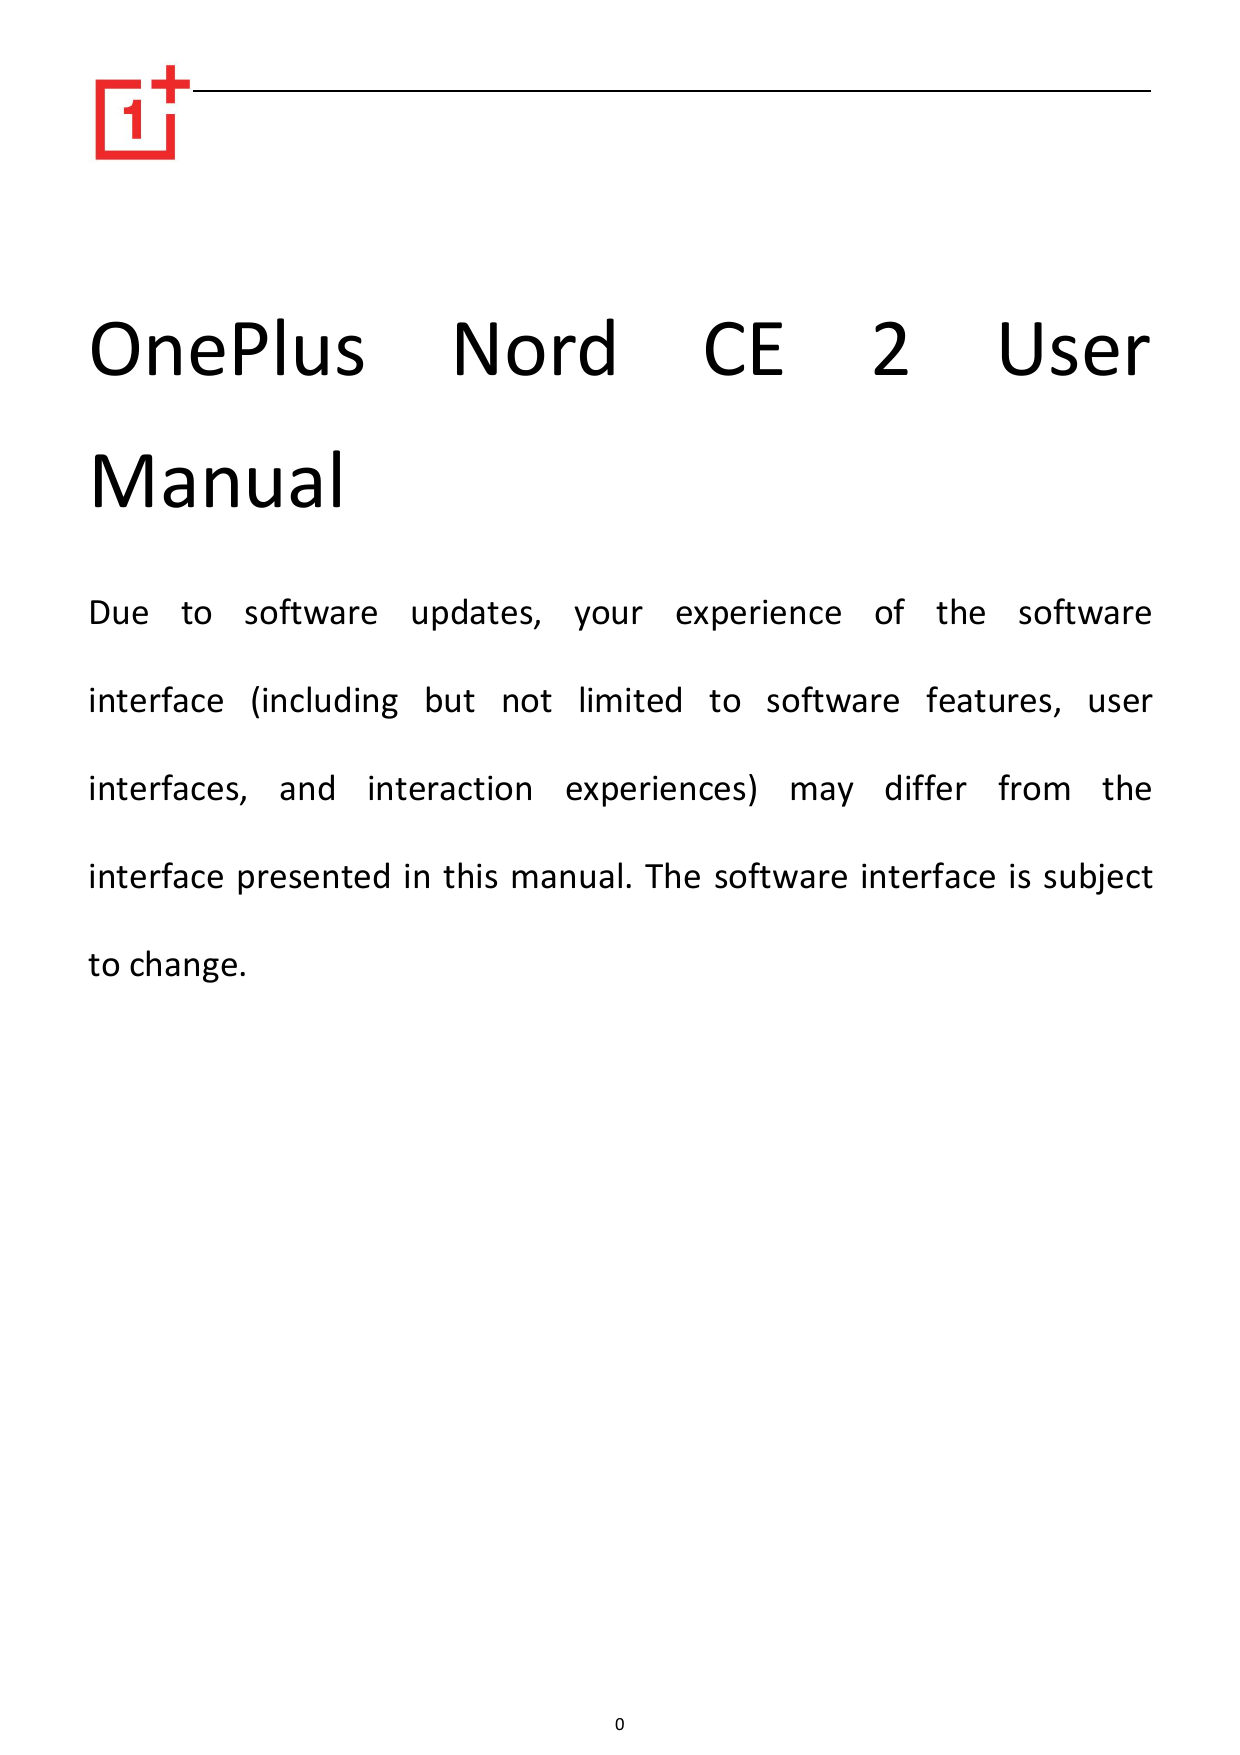 OnePlus Nord CE 2 UserManualDue to software updates, your experience of the softwareinterface (including but not limited to soft